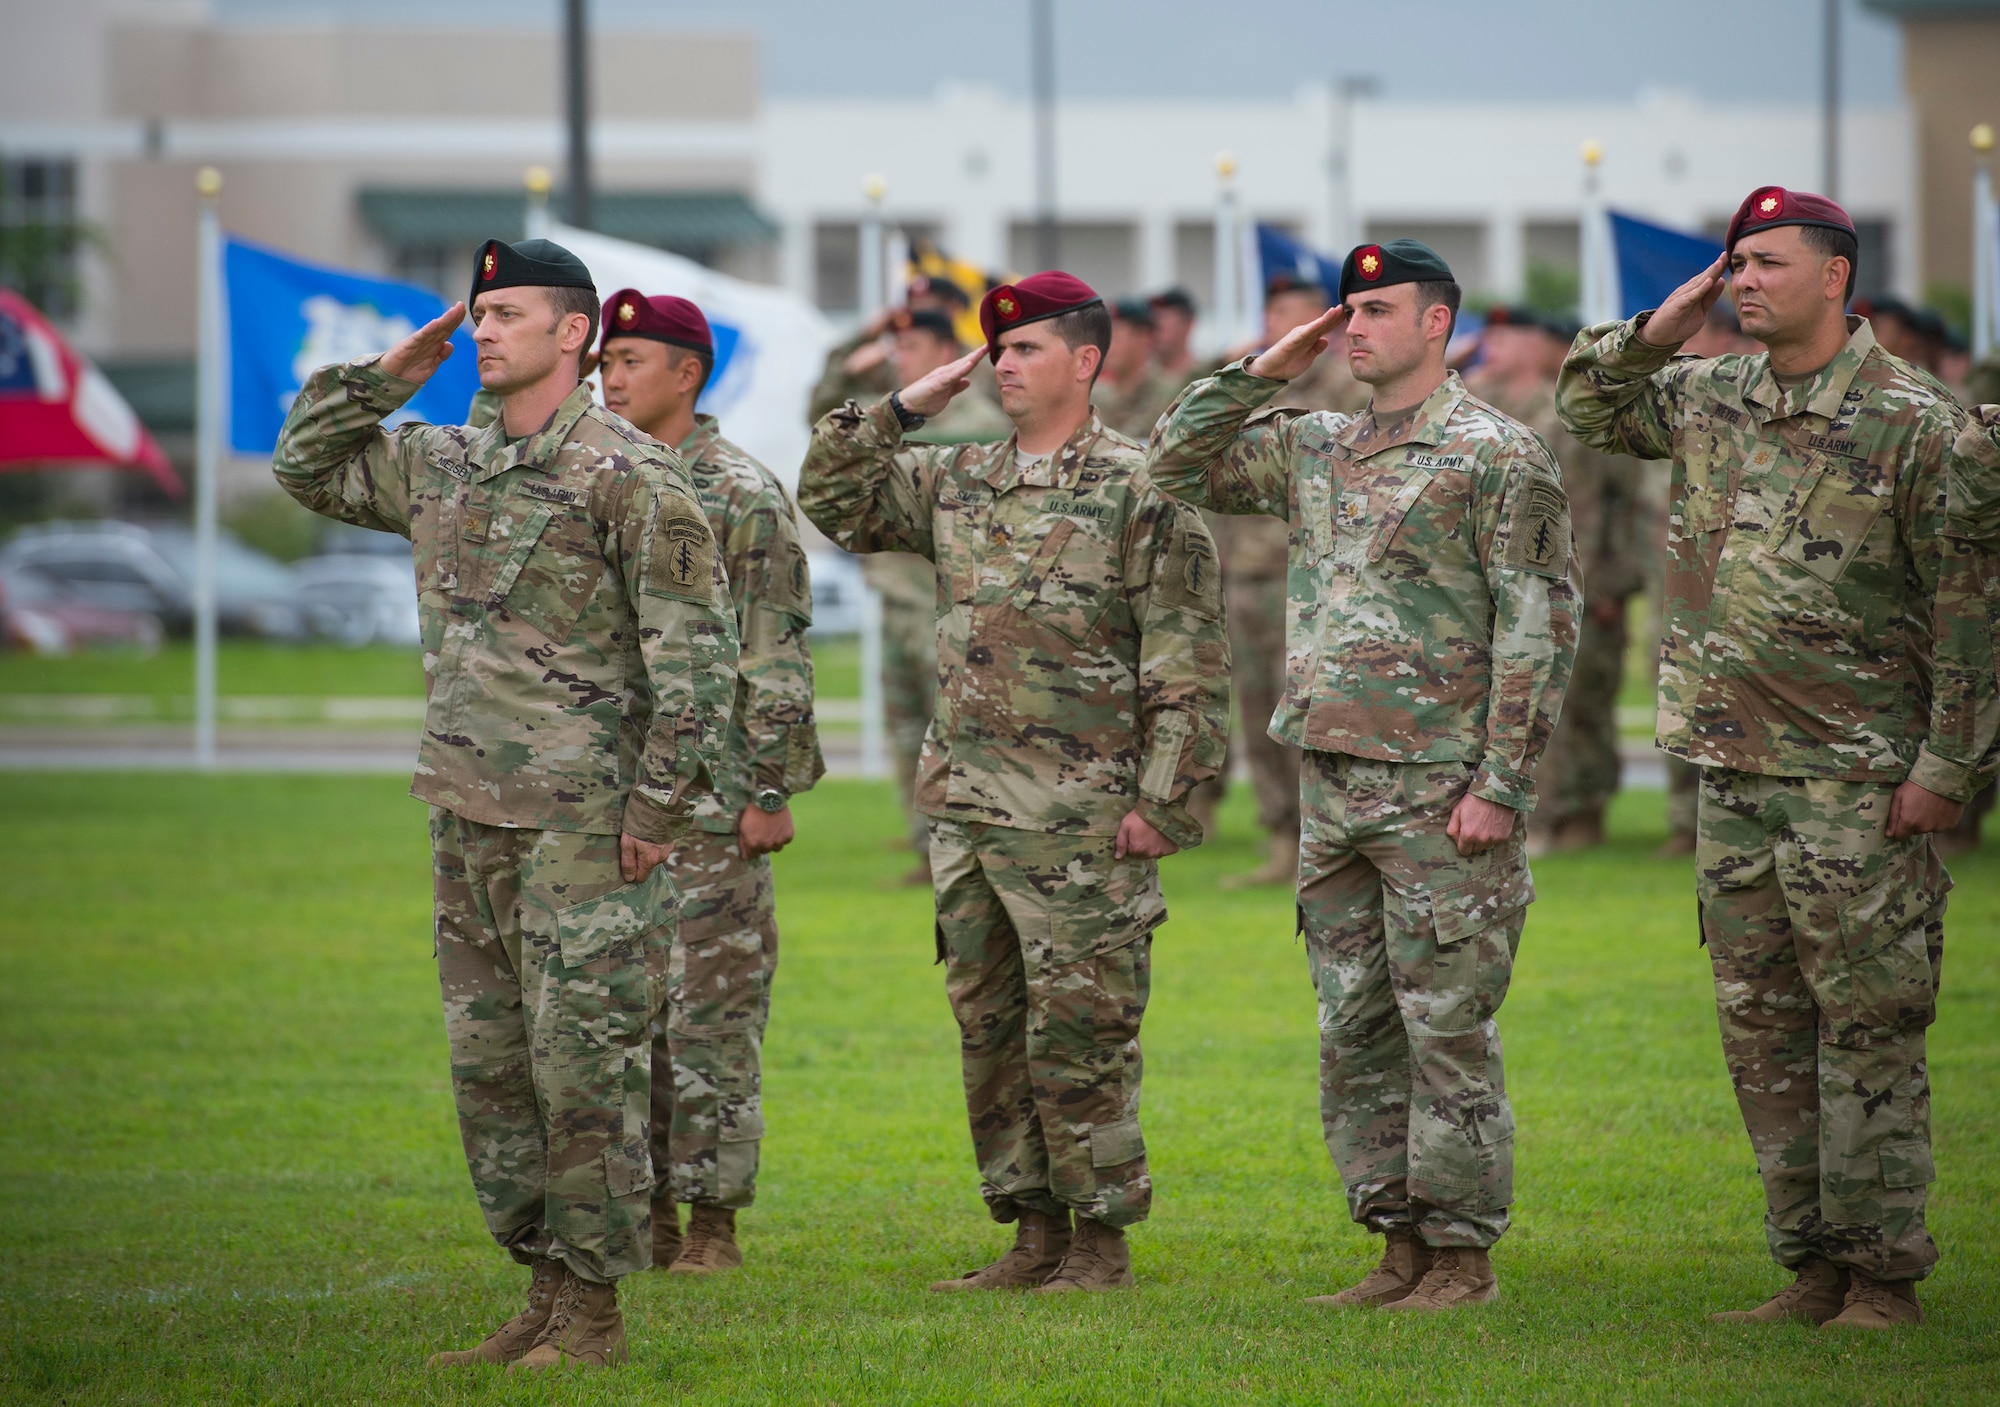 Soldiers of the 7th Special Forces Group (Airborne) salute during a change of command ceremony June 15 at Eglin Air Force Base, Fla. During the ceremony Col. Michael Ball relinquished command of the 7th SFG(A) to Col. Patrick Colloton. Colloton previously served as the 7th SFG(A) 1st Battalion commander. (U.S. Air Force photo/Ilka Cole)